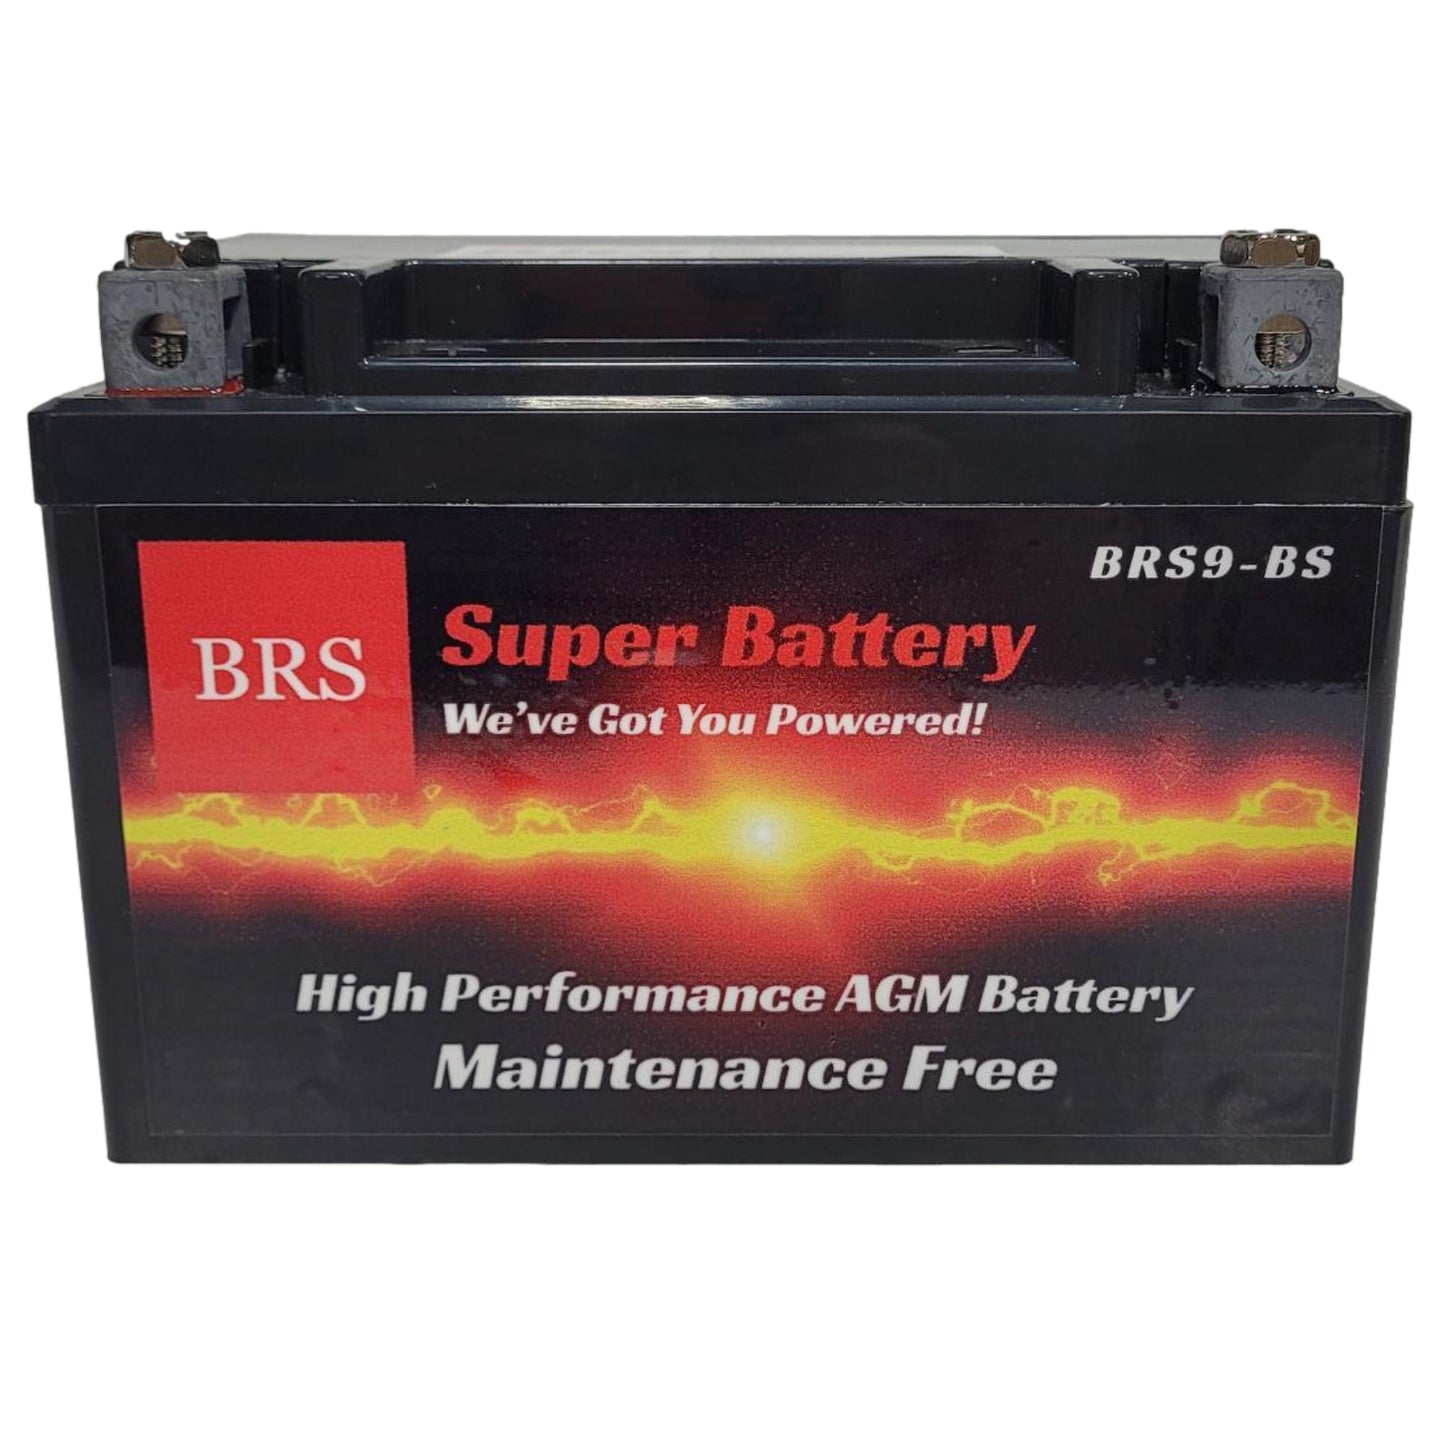 BRS9-BS 30 Day Warranty Battery & Smart Charger / Maintainer Combo Bundle Kit - BRS Super Battery